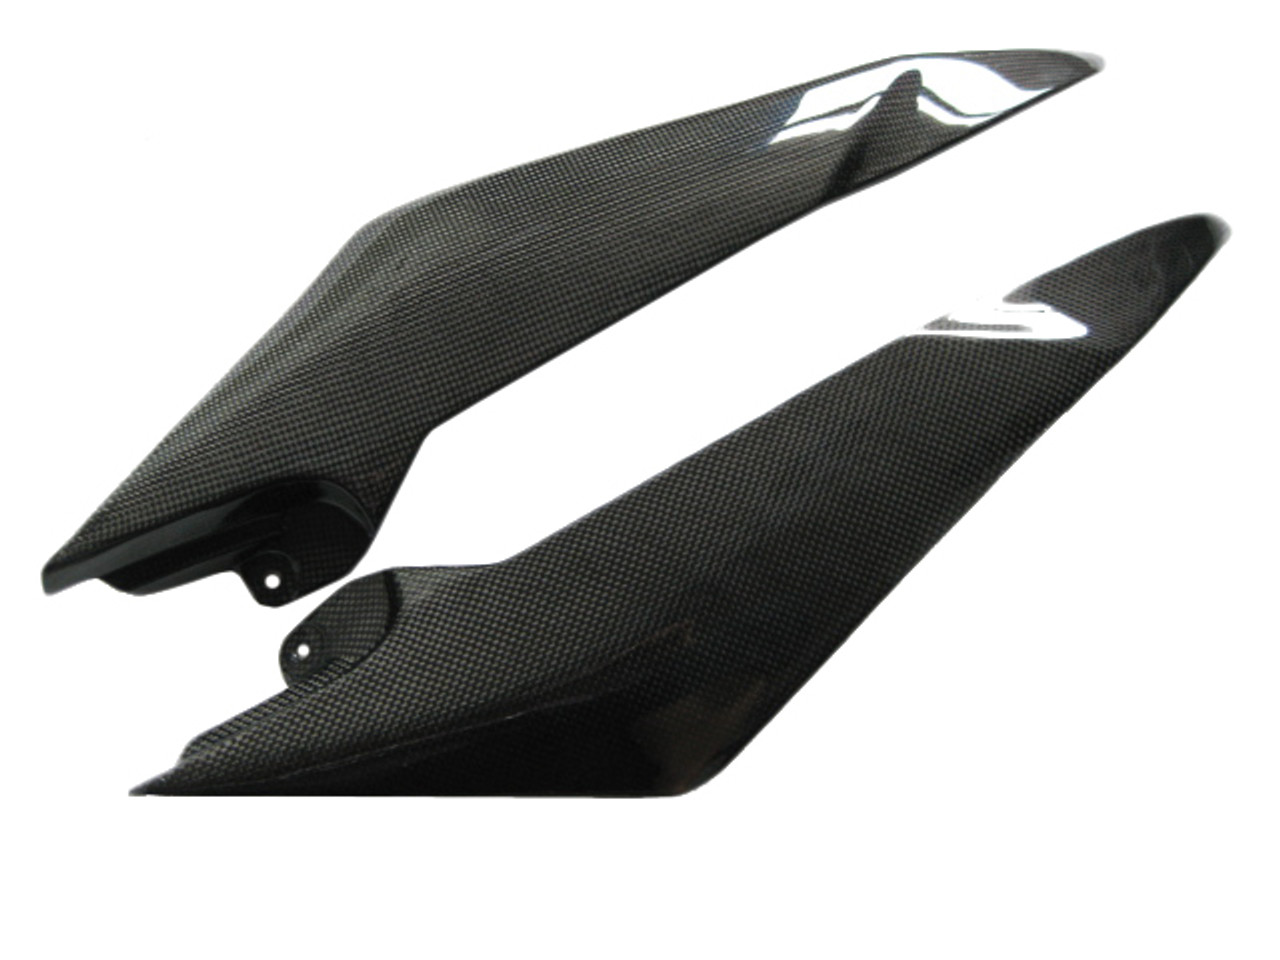 Glossy Plain Weave Carbon Fiber Side Cowl Covers for Yamaha R6 08-16